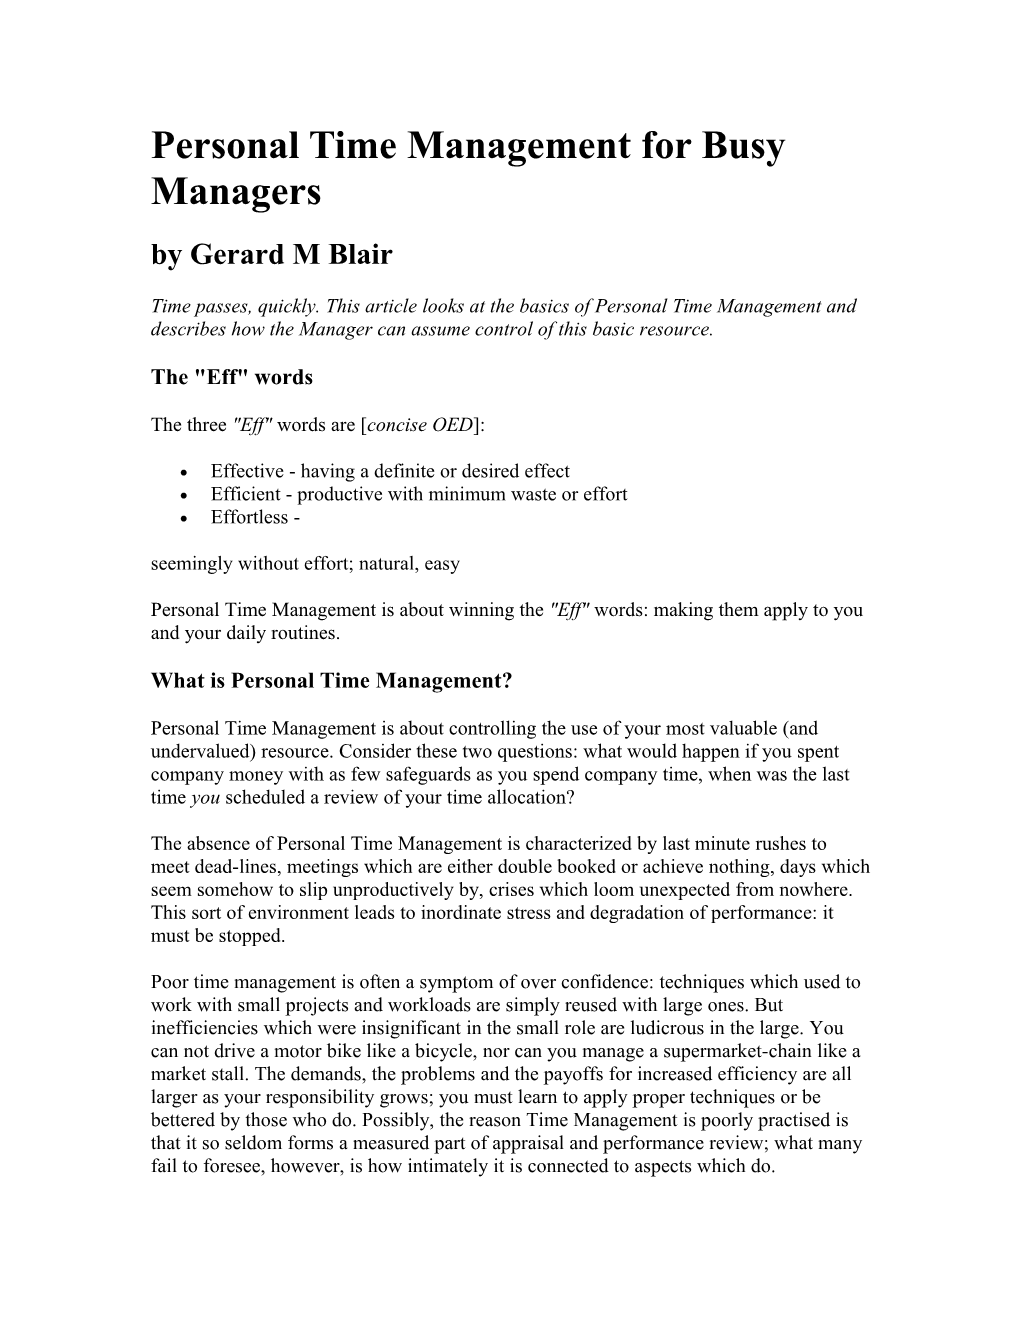 Personal Time Management for Busy Managers